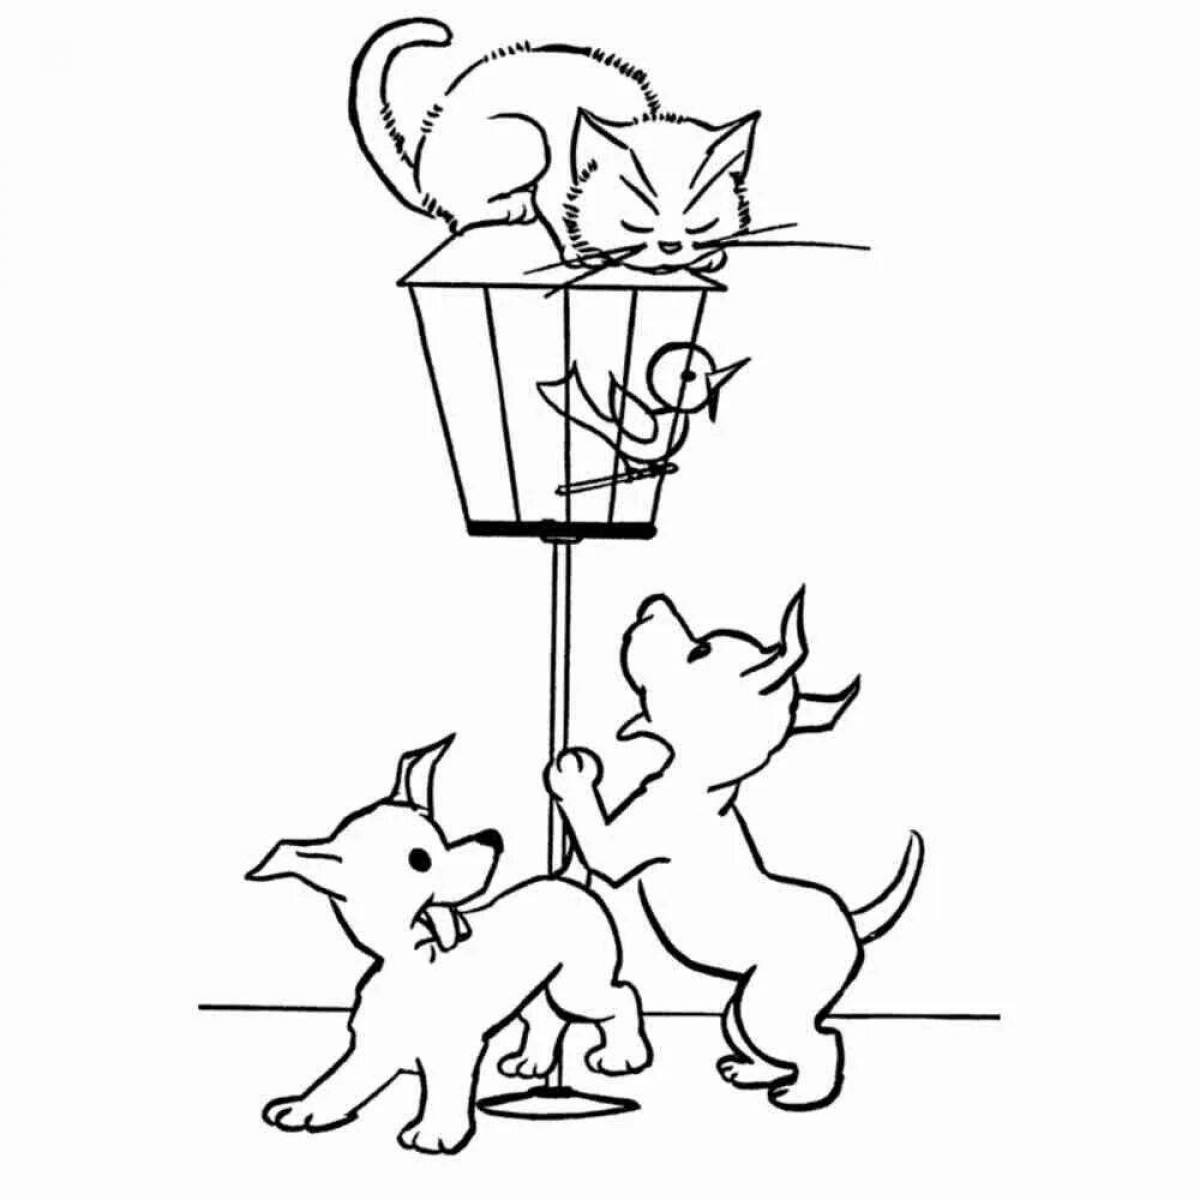 Joyful cat and dog coloring page